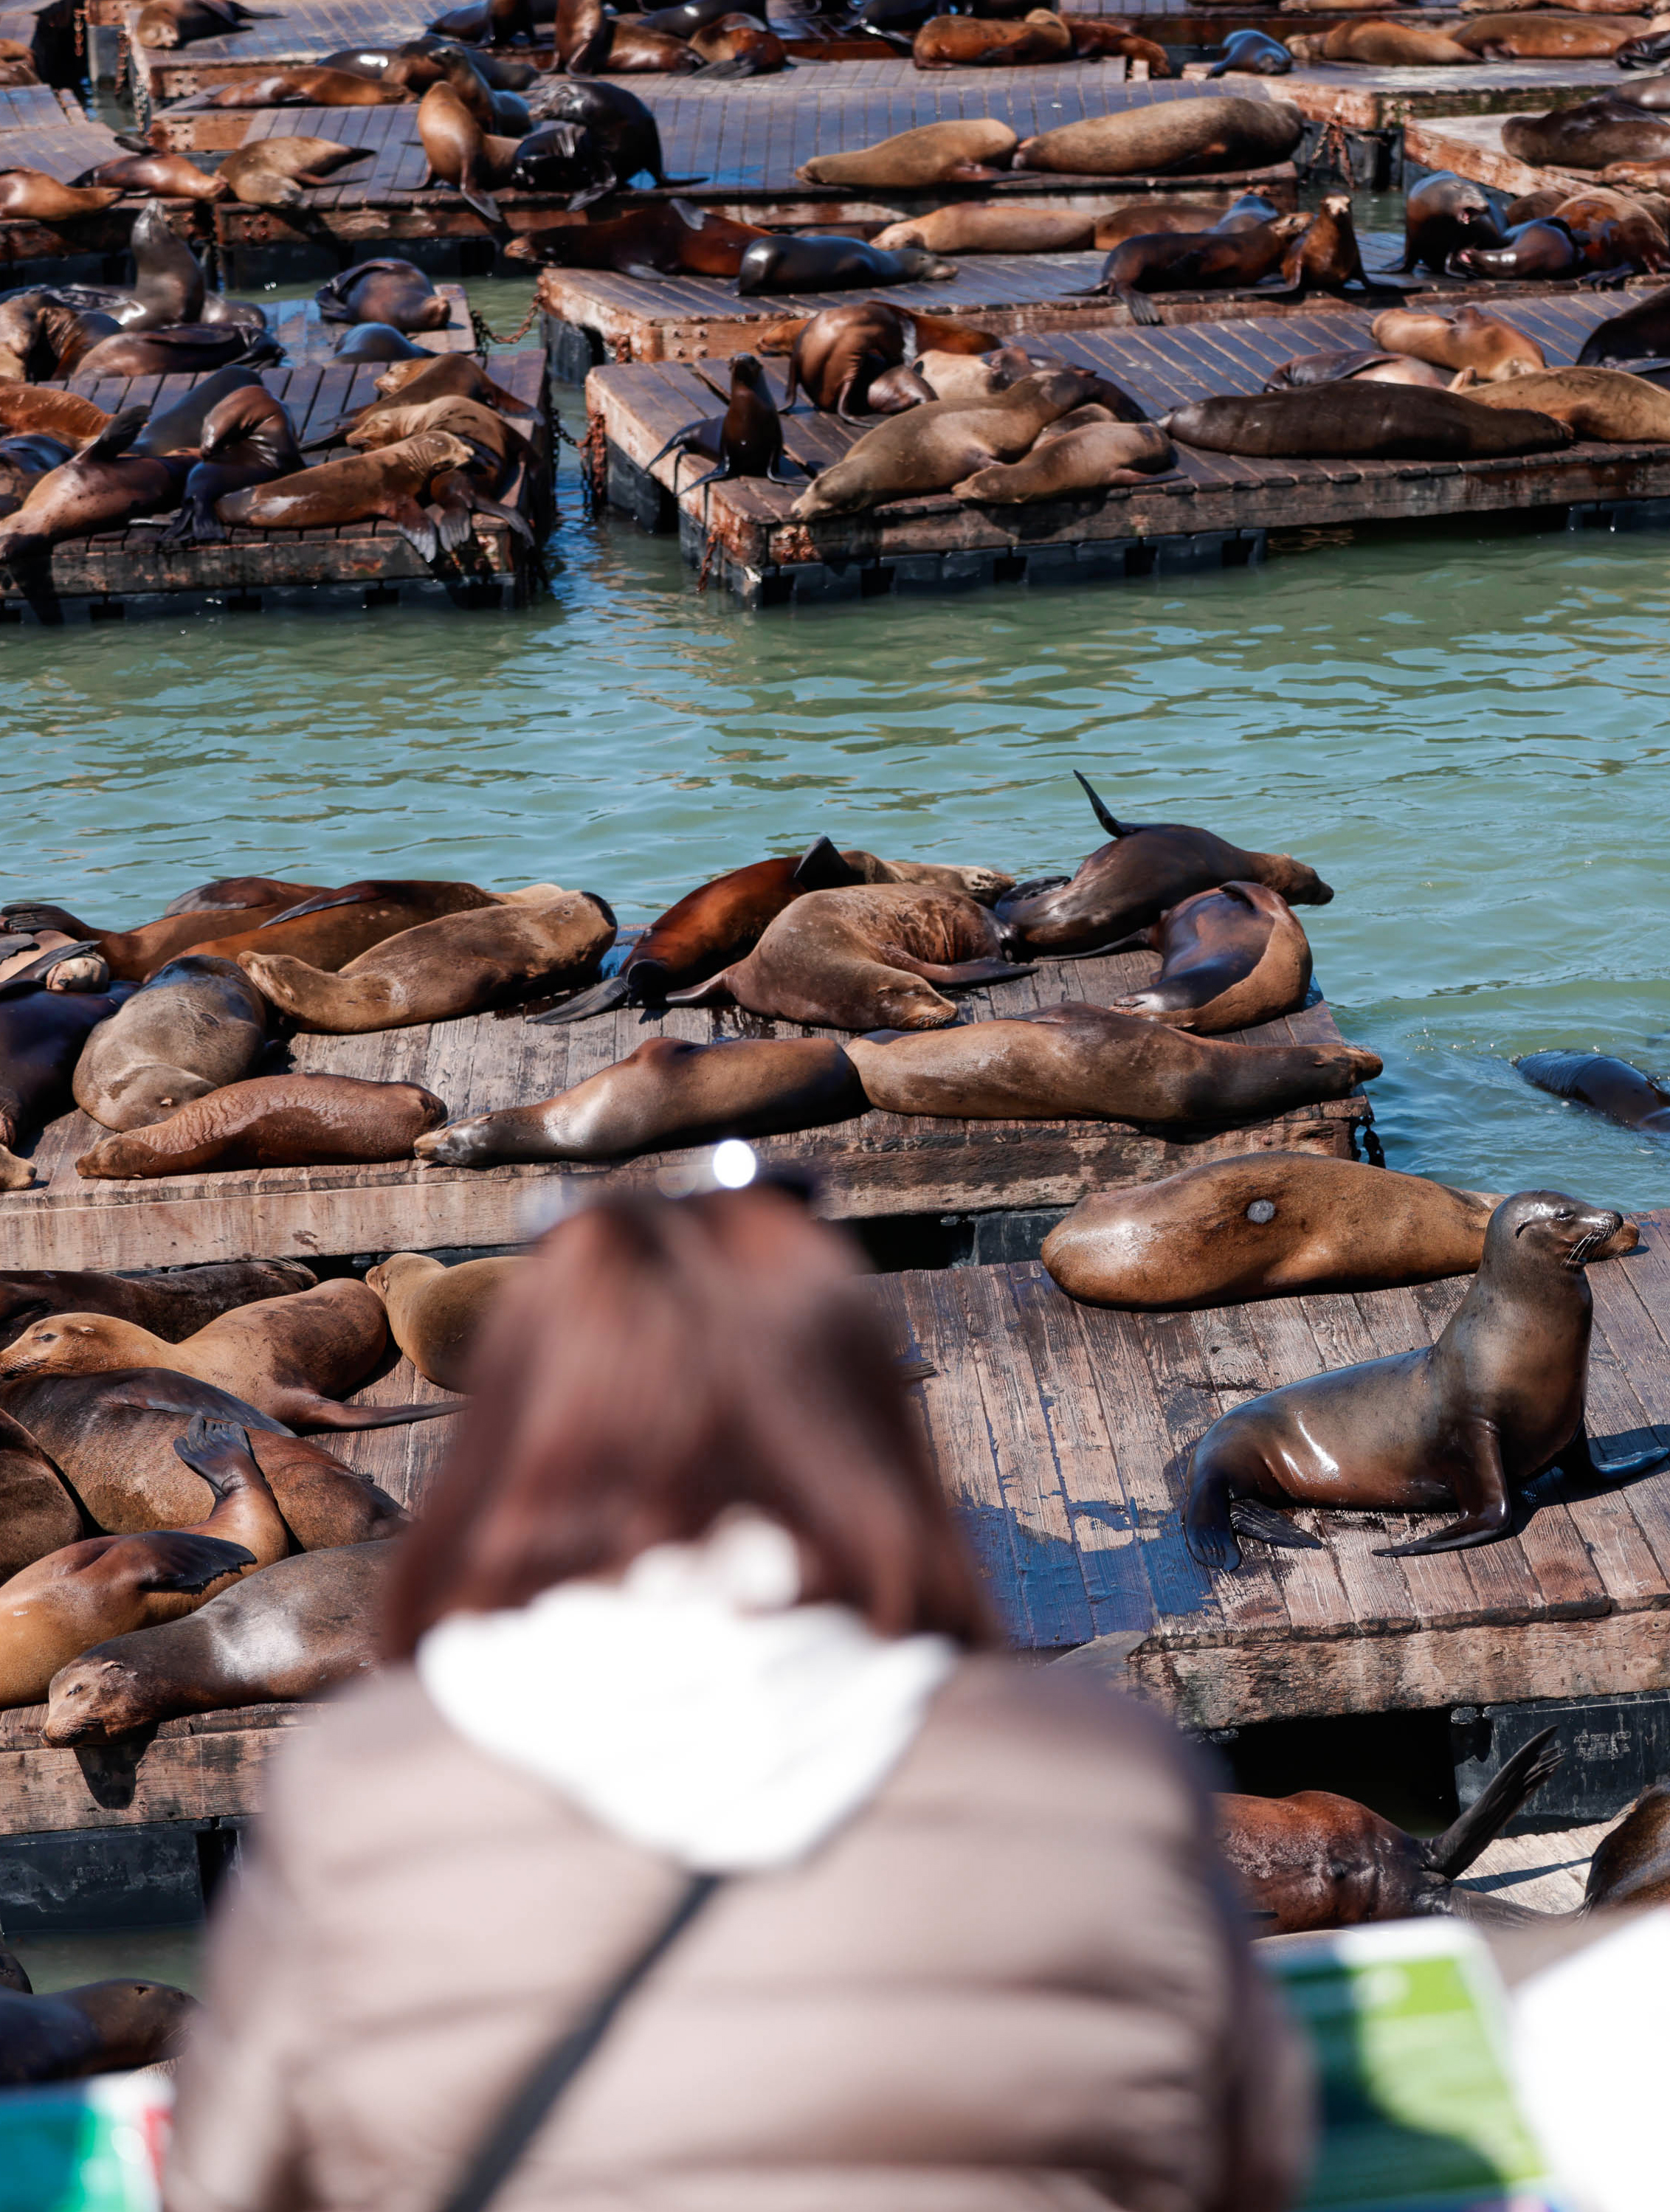 Sea lions crowd on wooden docks in the water; a person in a jacket observes them.